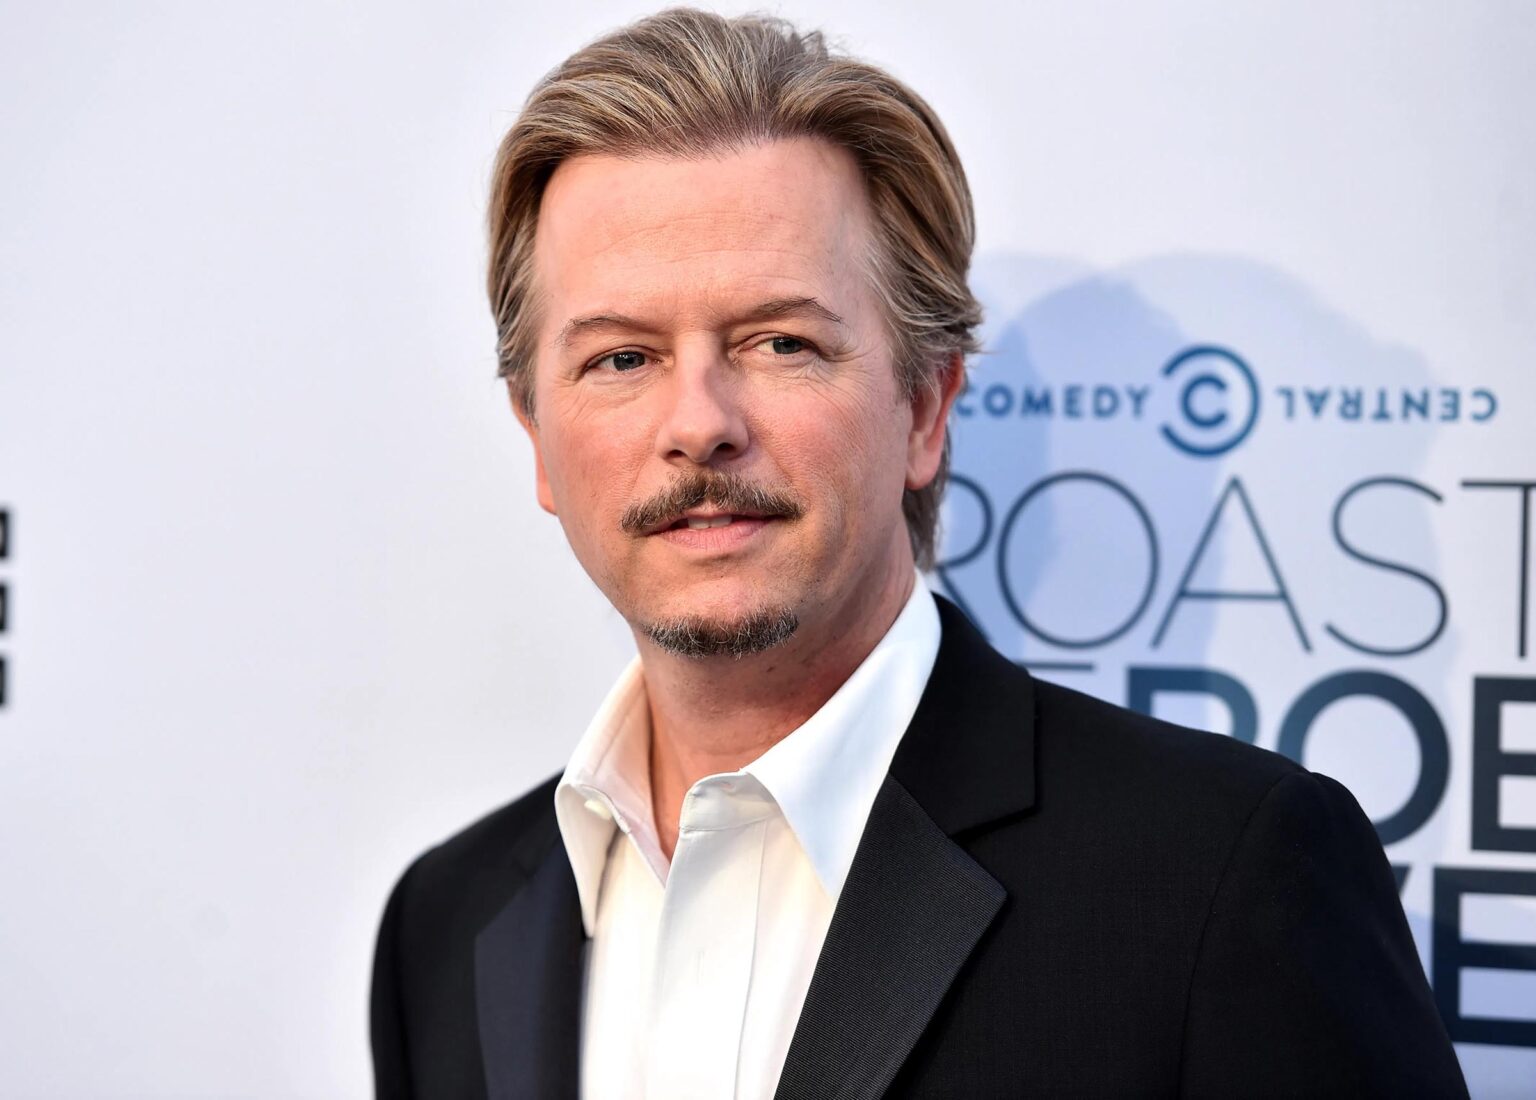 Hollywood comedy star David Spade is set to host the upcoming 'The Netflix Afterparty.' What does this mean for his net worth?